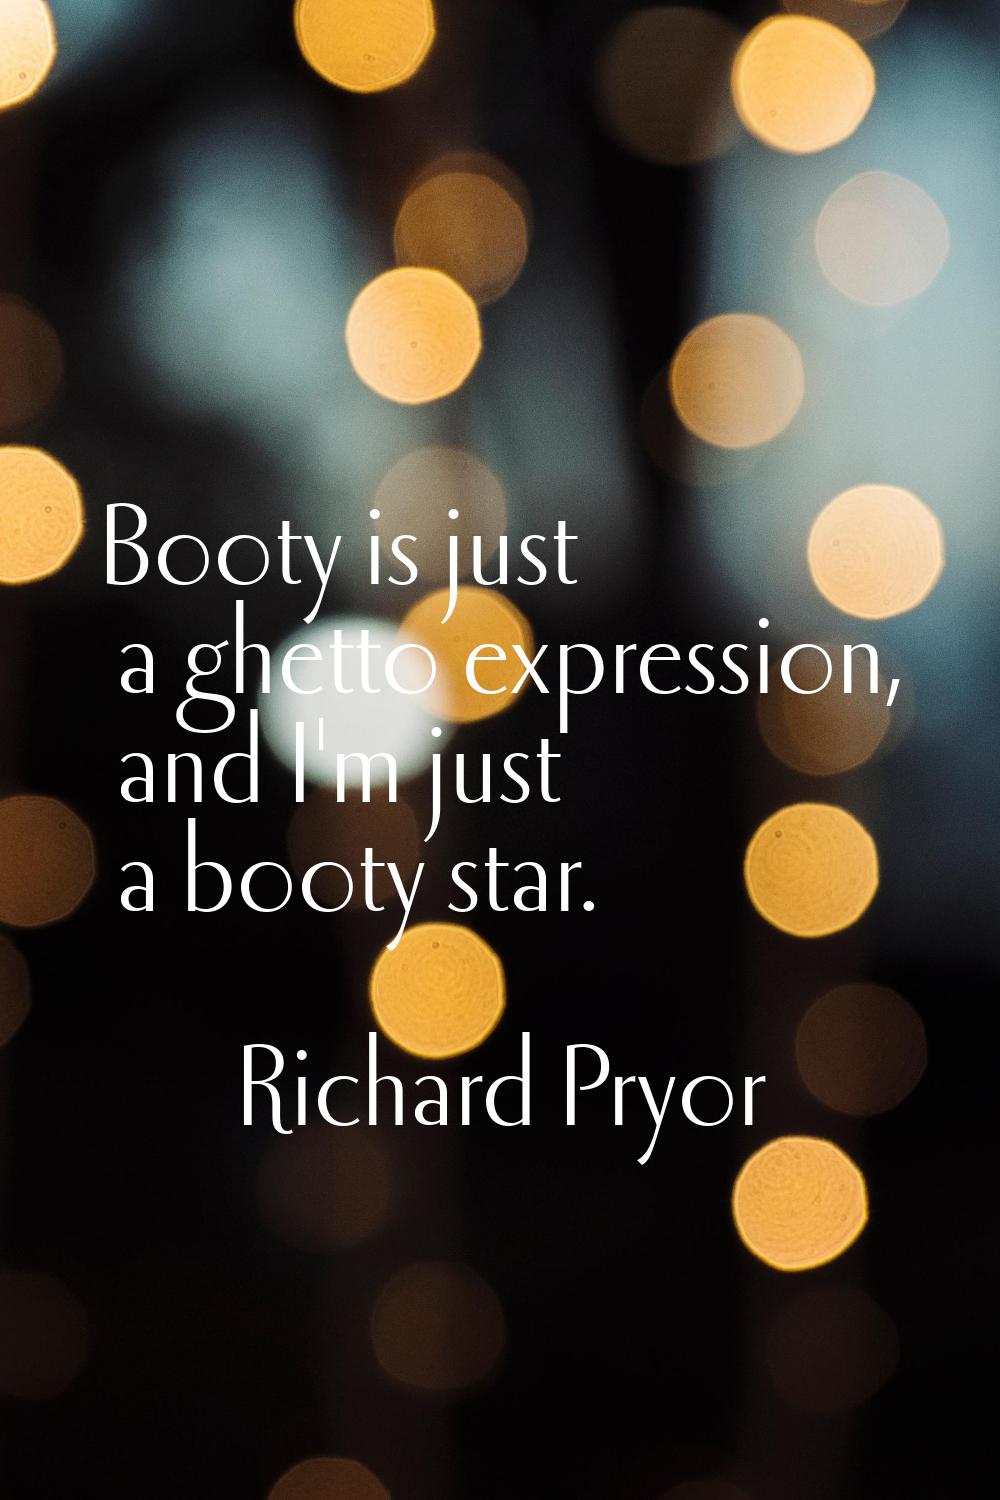 Booty is just a ghetto expression, and I'm just a booty star.